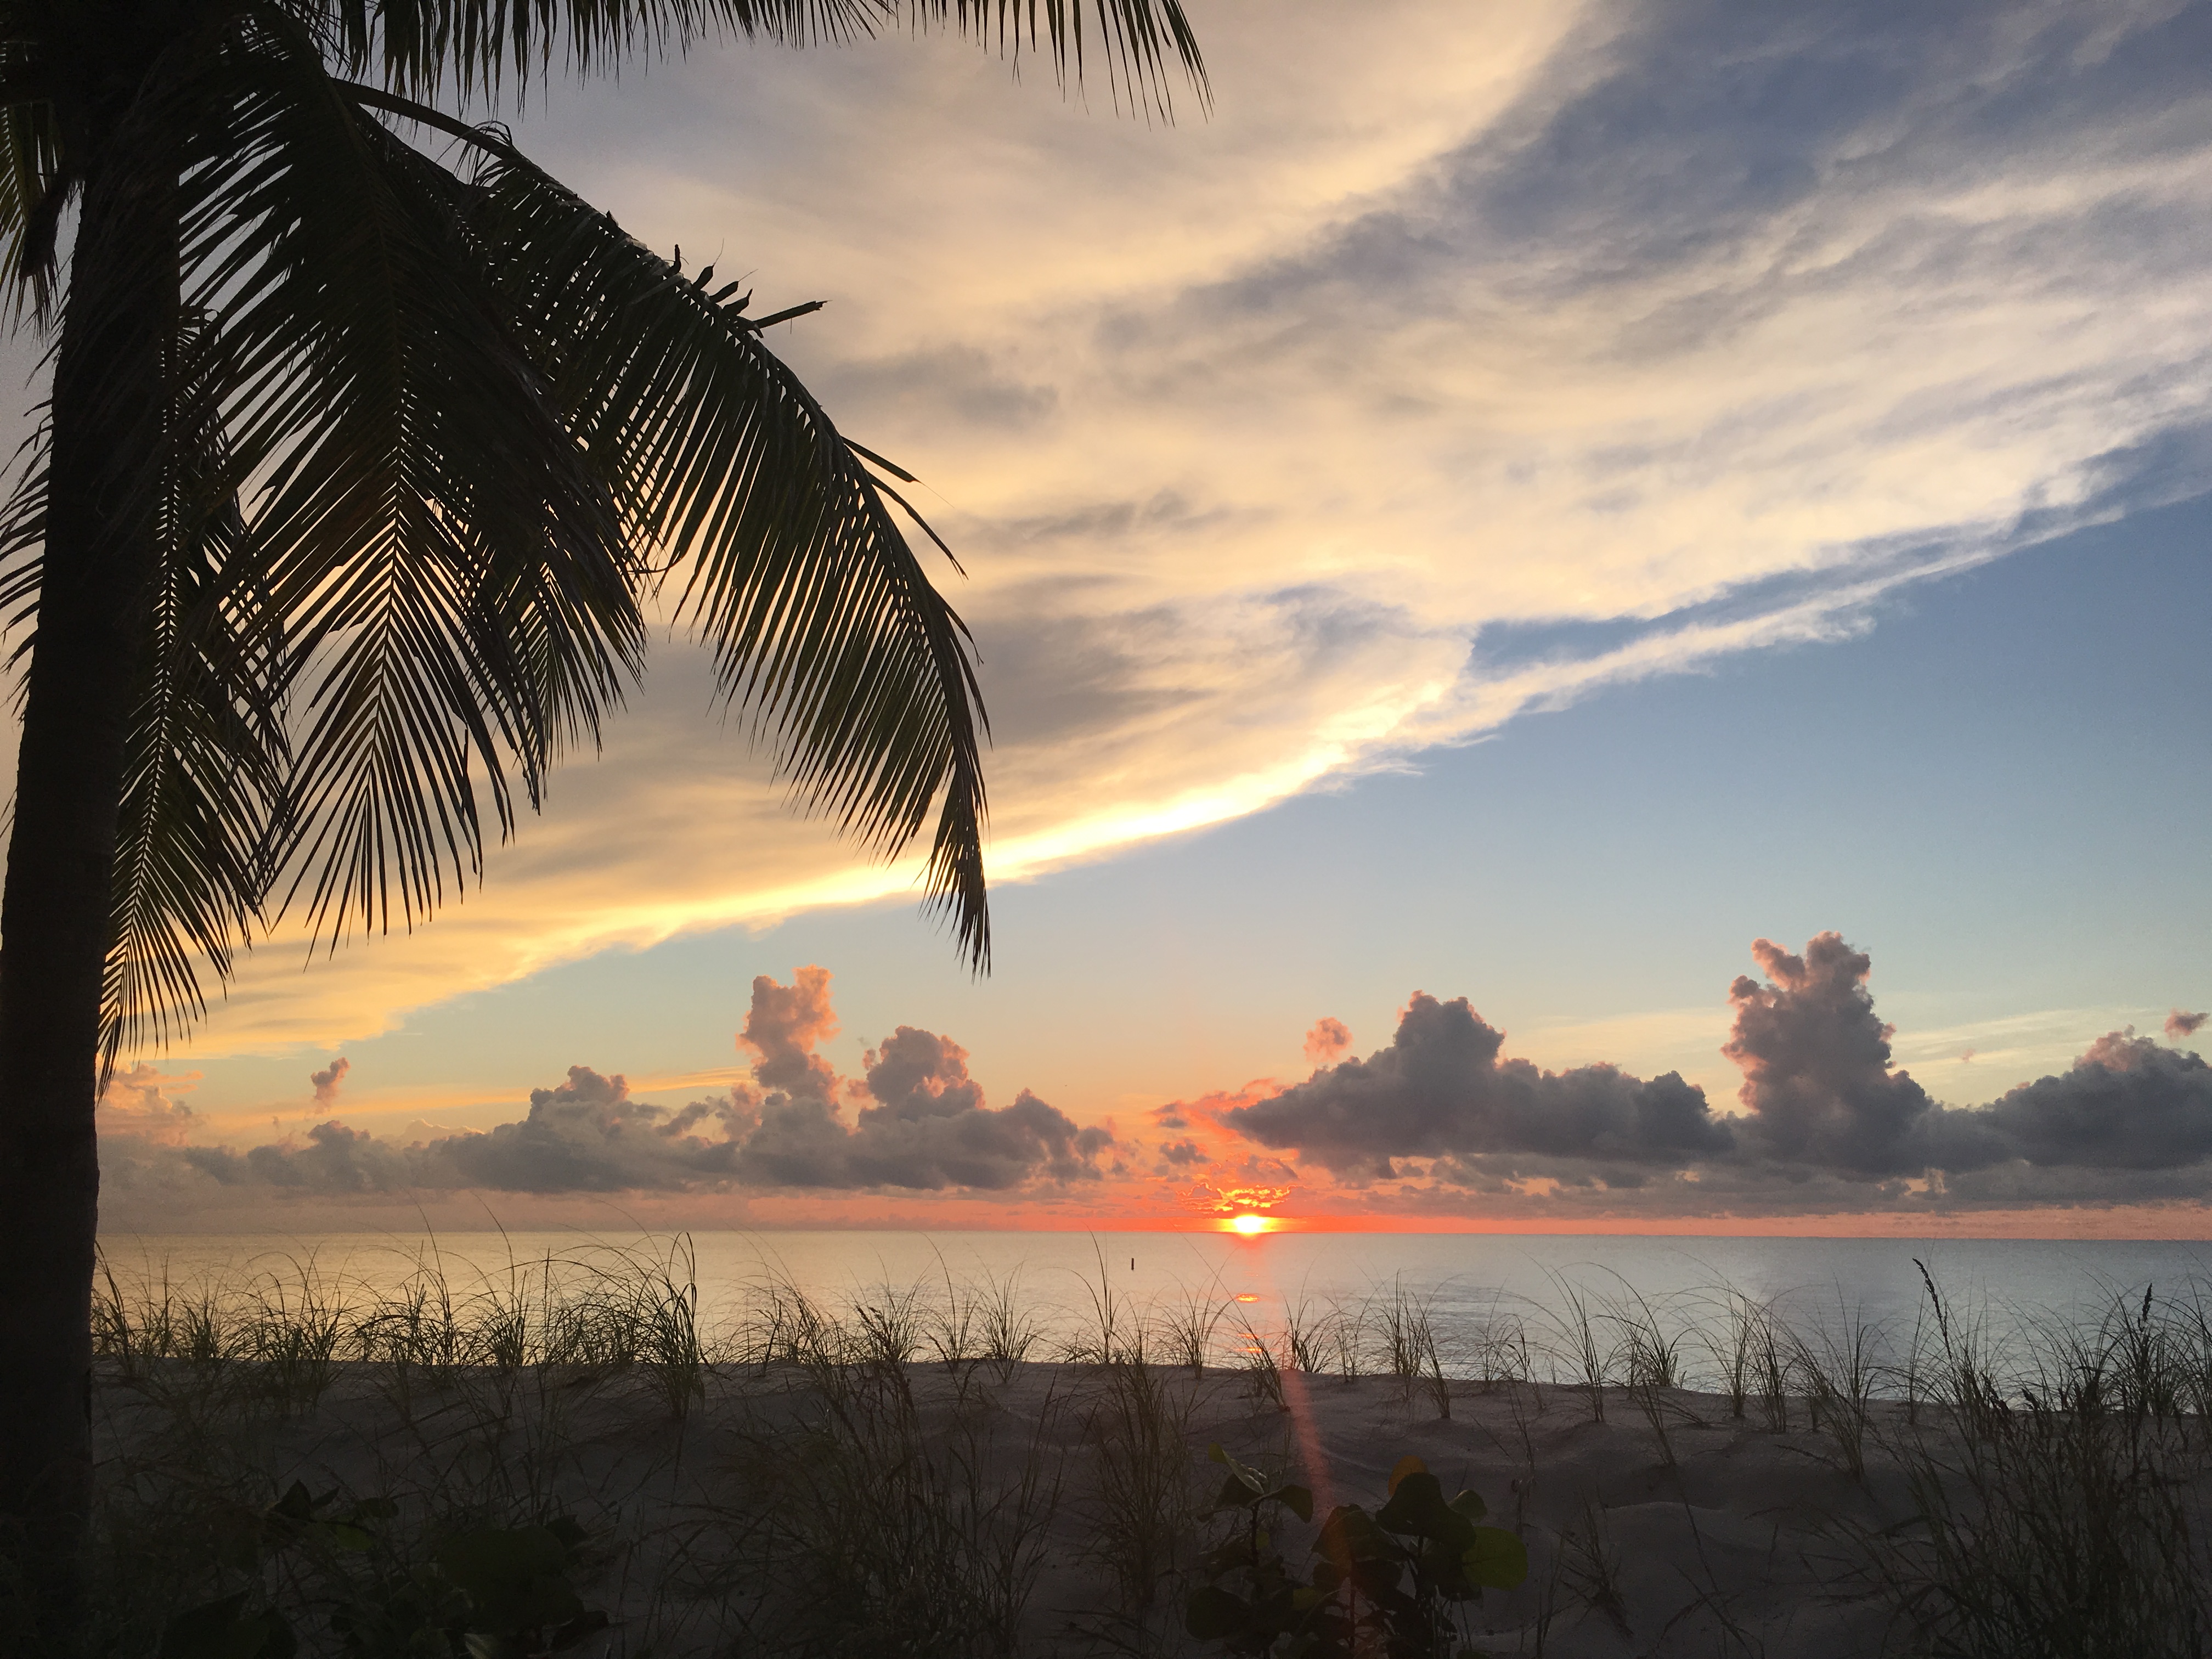 Sunrise on Ft. Lauderdale Beach, just a 5 minute walk from apartments